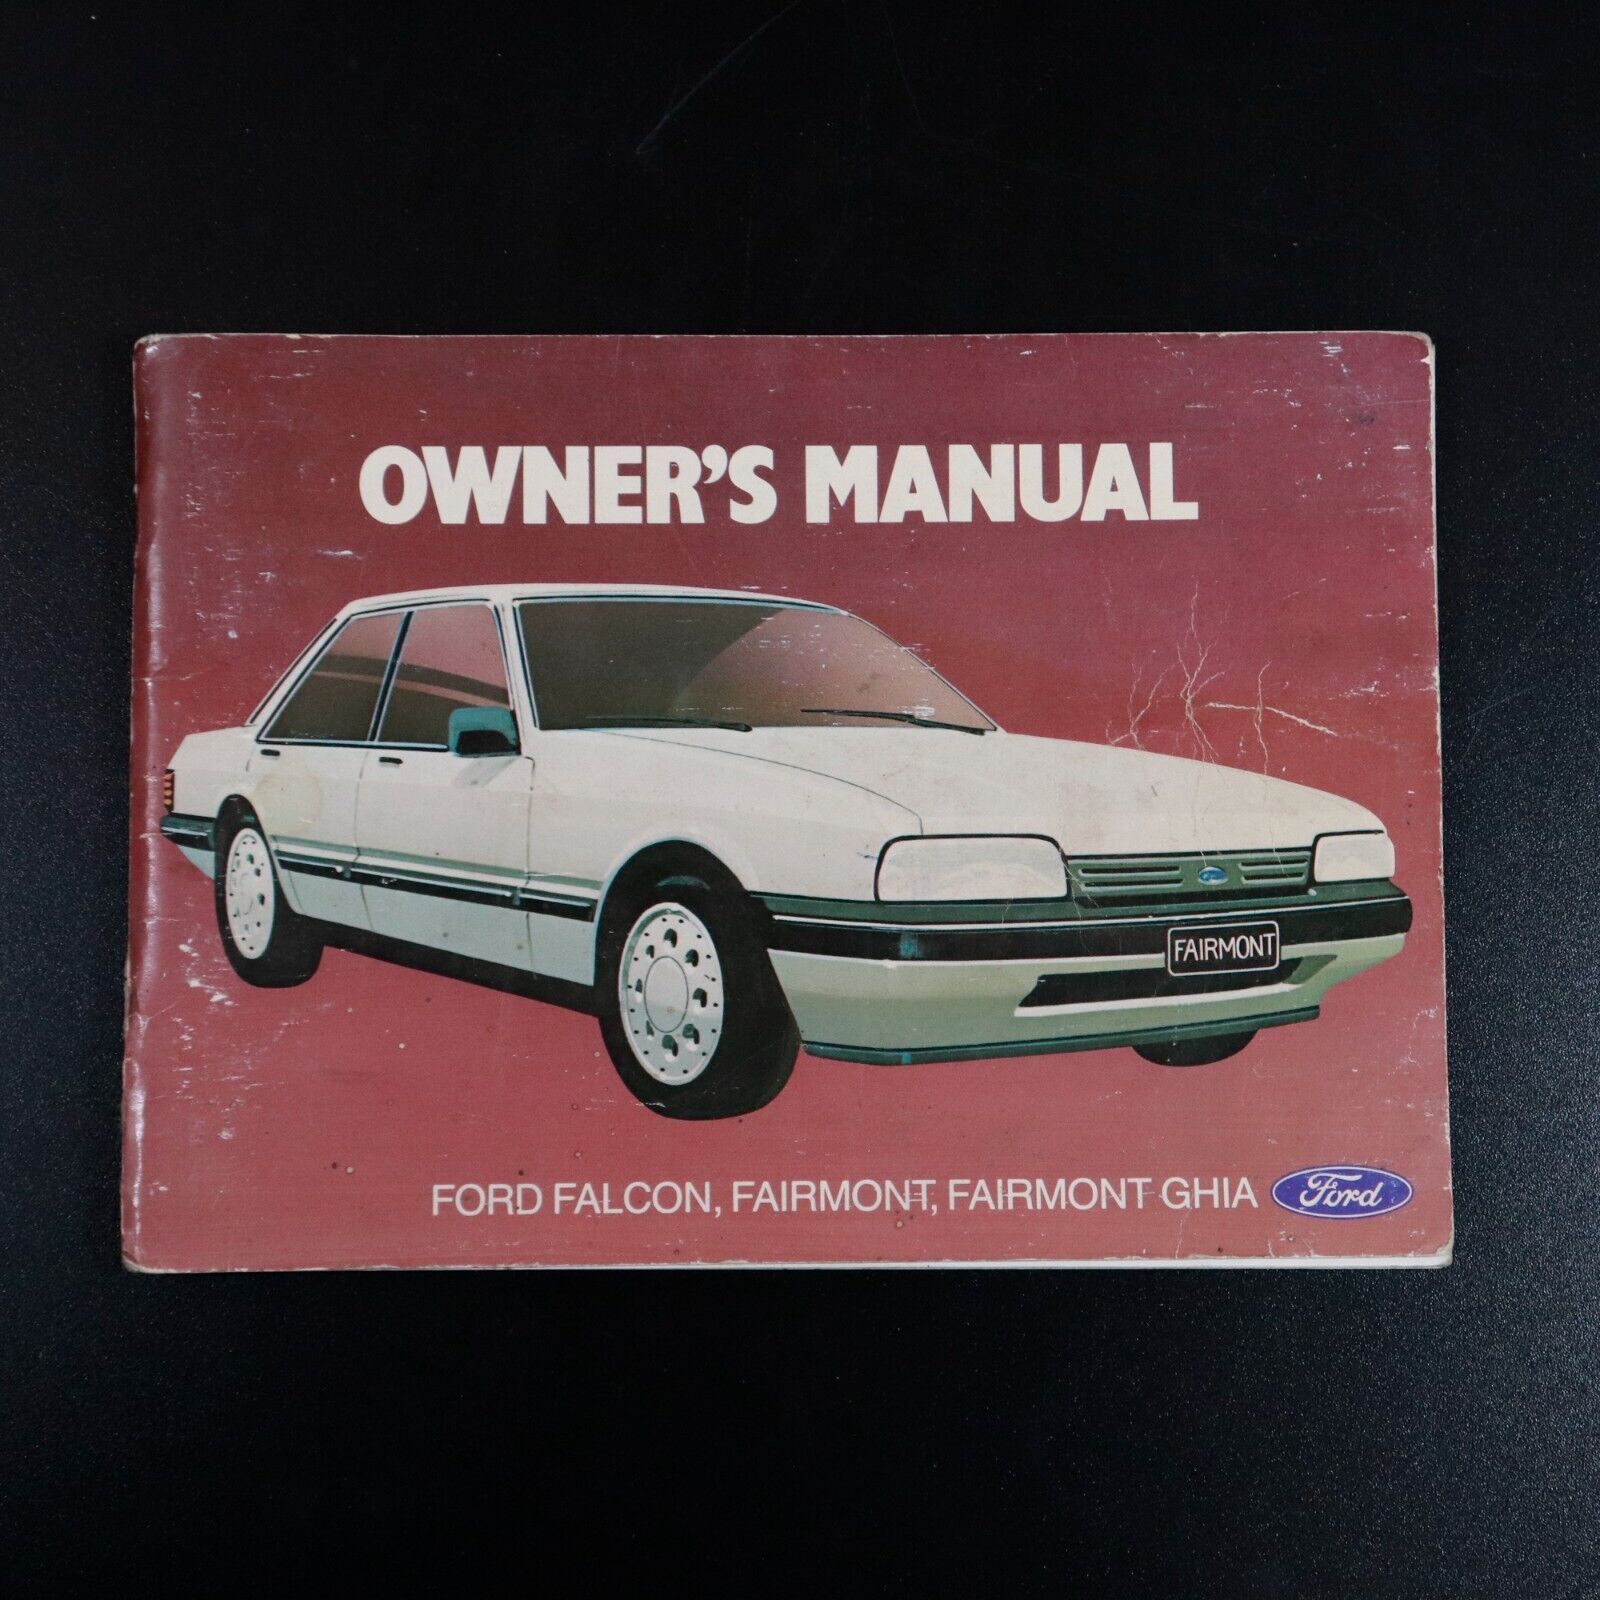 1985 Ford Falcon Fairmont XF Owners Manual & Service Books Automotive Book - 0